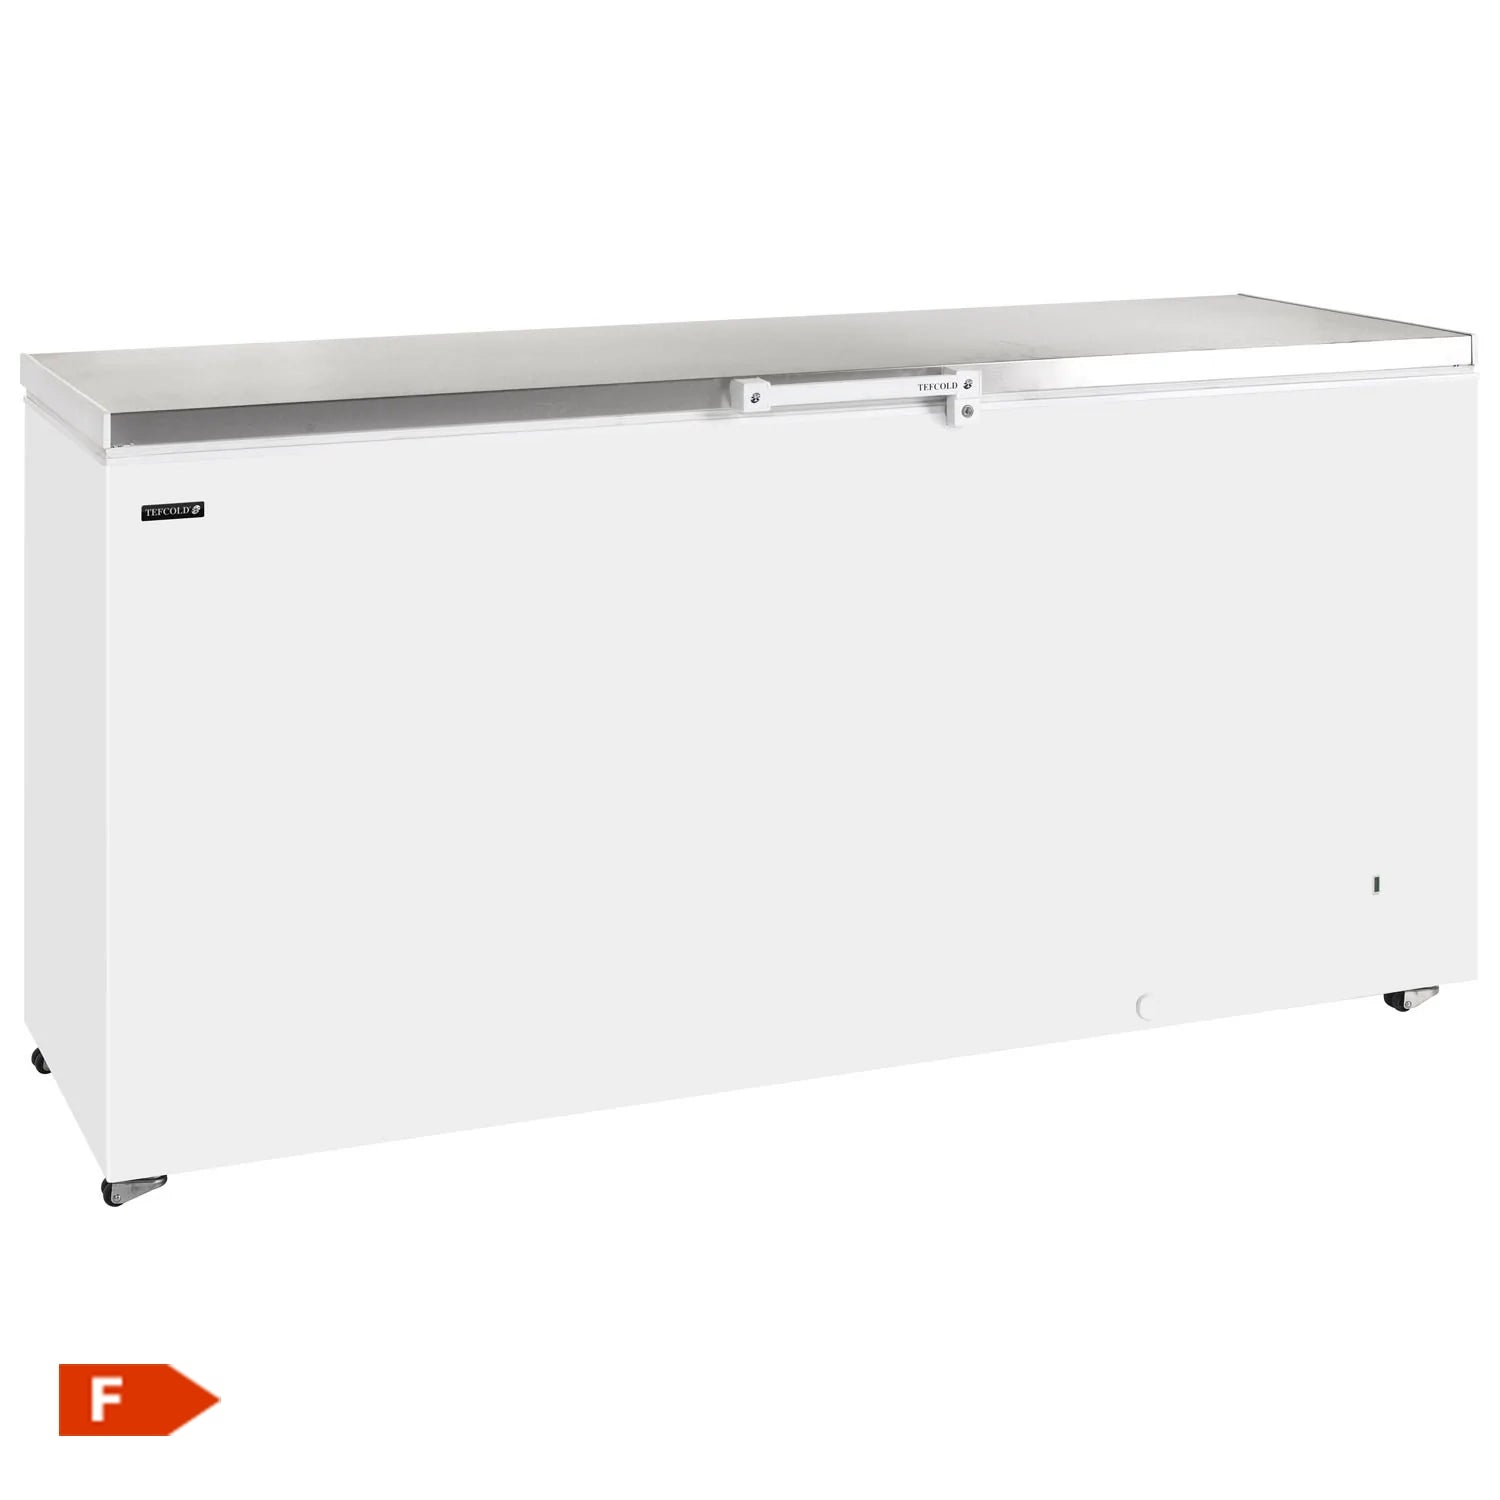 Commercial Chest Freezers Stainless Steel 650 Litre.Product ref:00179.MODEL:GC73.🚚 4-6 Days Delivery